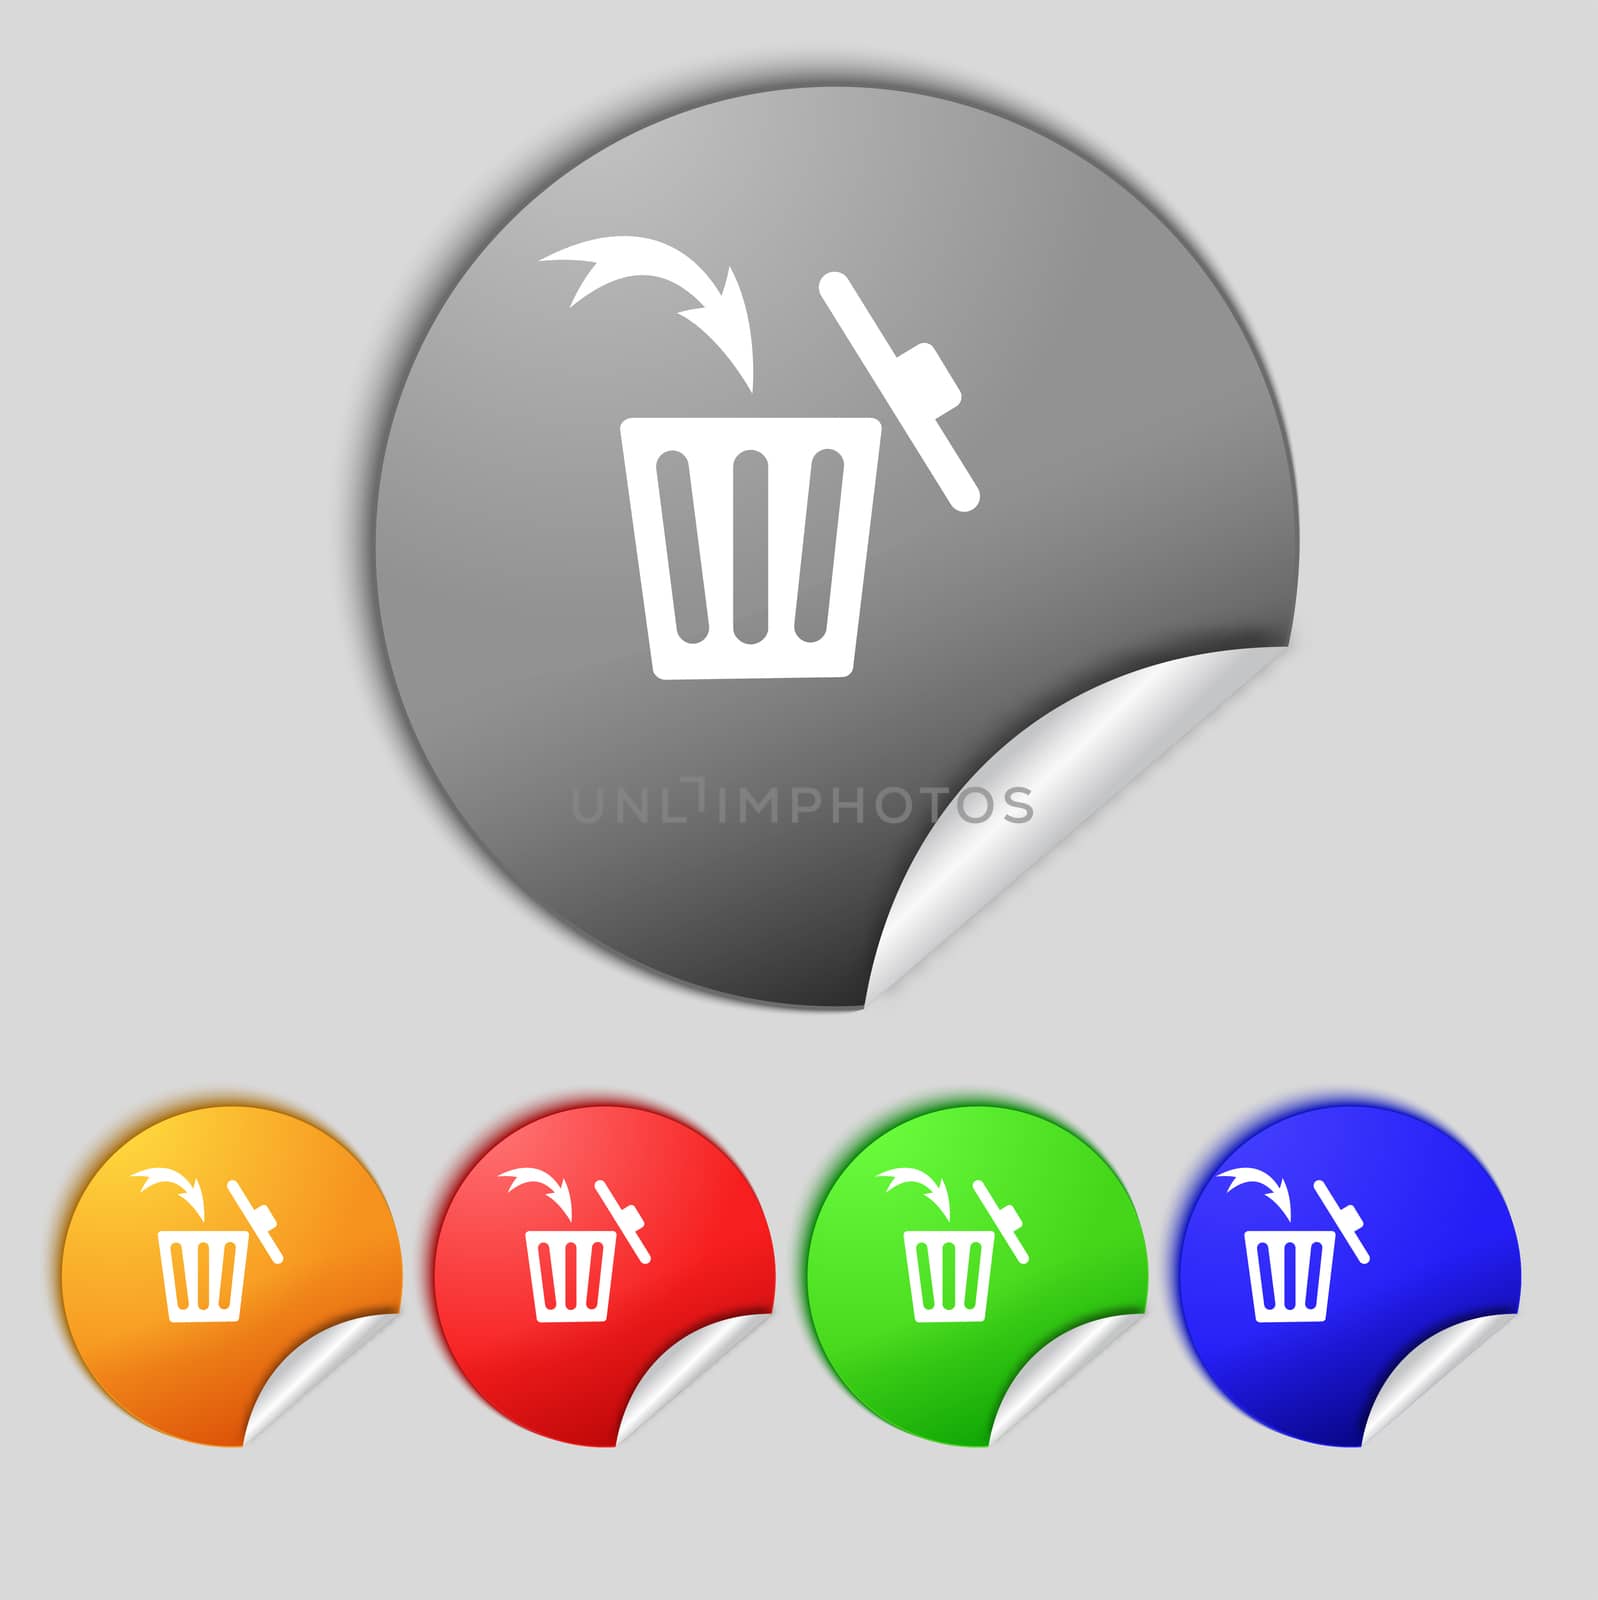 Recycle bin sign icon. Bins symbol. Set colourful buttons.  by serhii_lohvyniuk